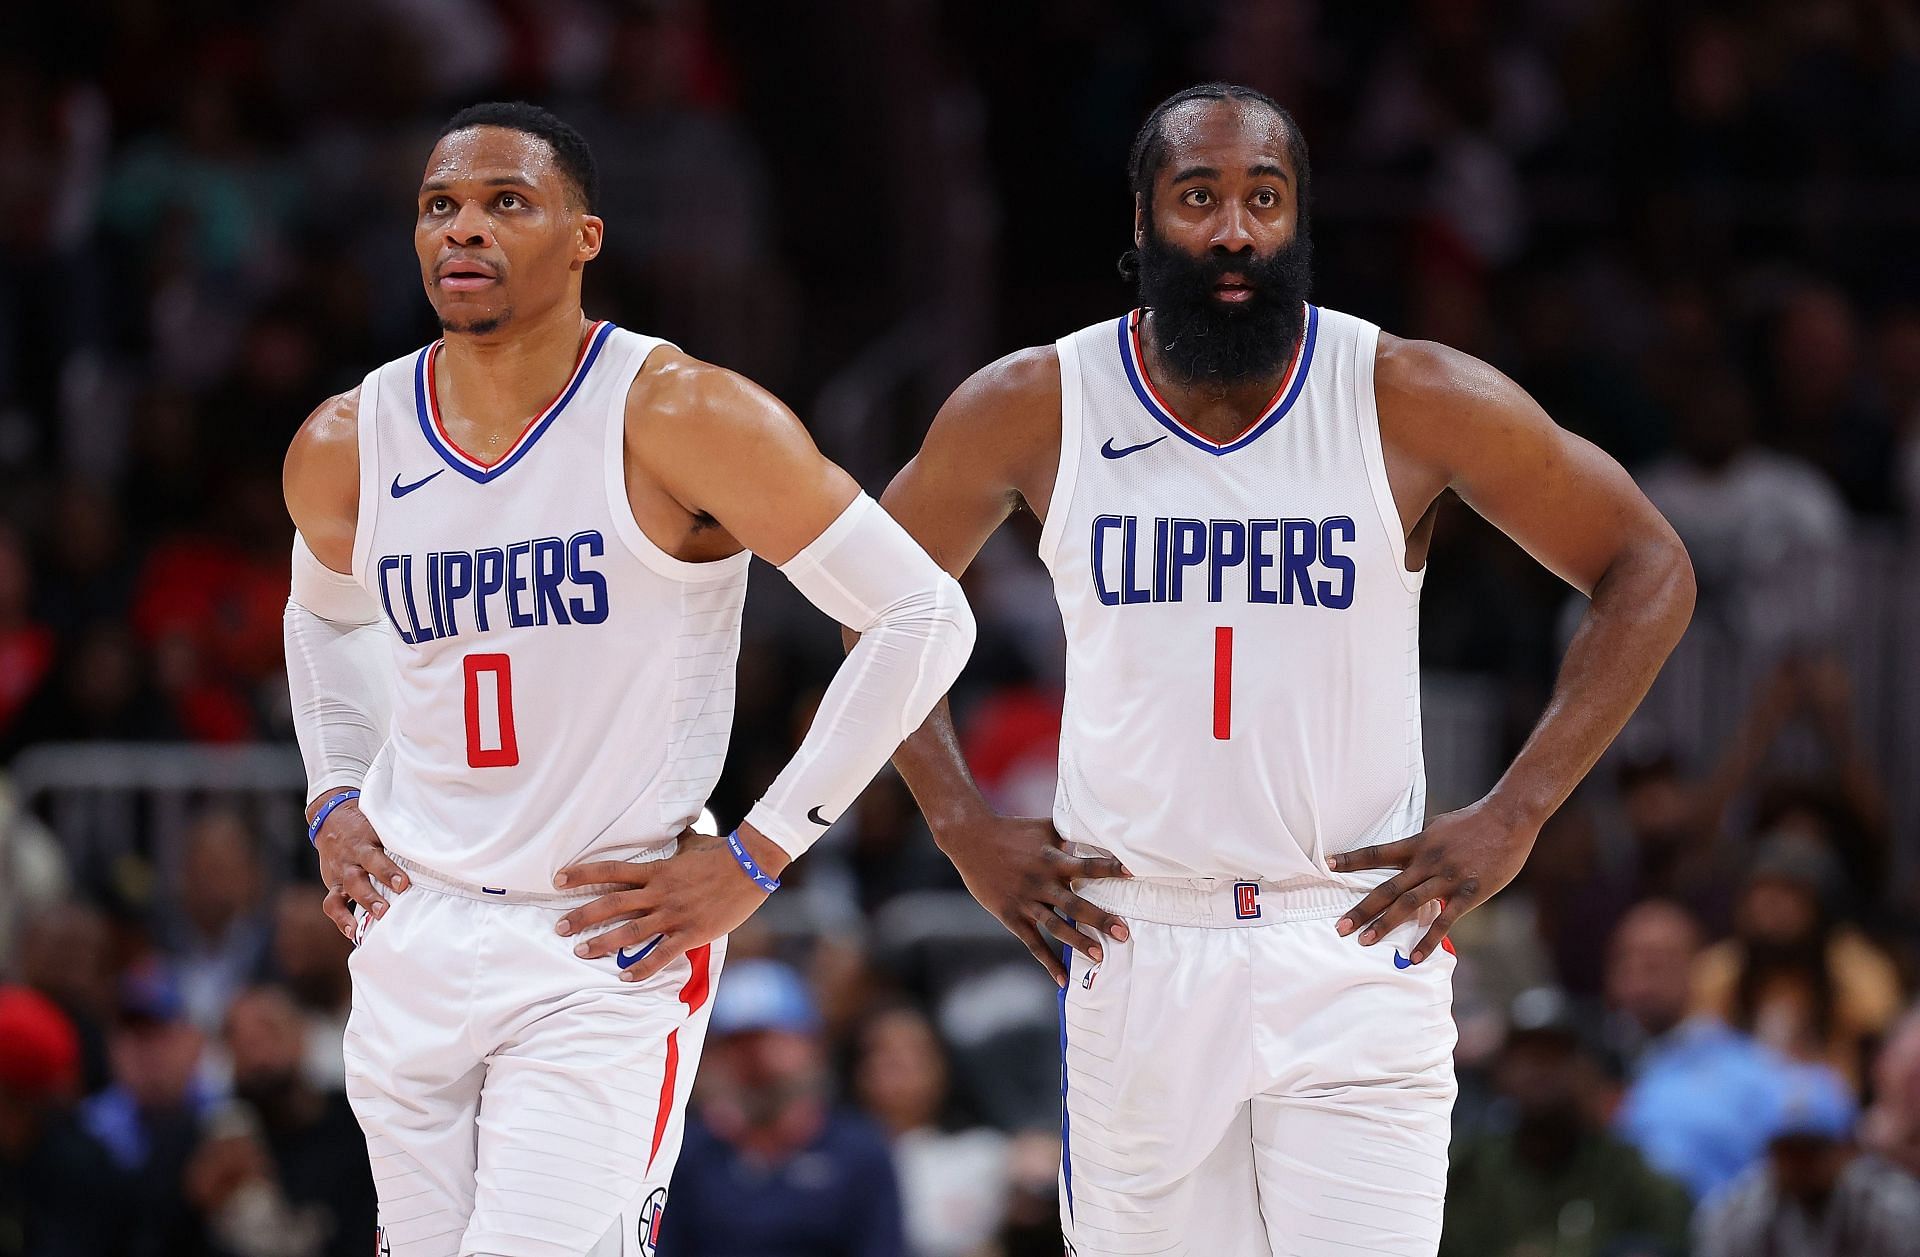 Clippers&#039; &lt;a href=&#039;https://www.sportskeeda.com/basketball/russell-westbrook&#039; target=&#039;_blank&#039; rel=&#039;noopener noreferrer&#039;&gt;Russell Westbrook&lt;/a&gt; (left) and James Harden (right)